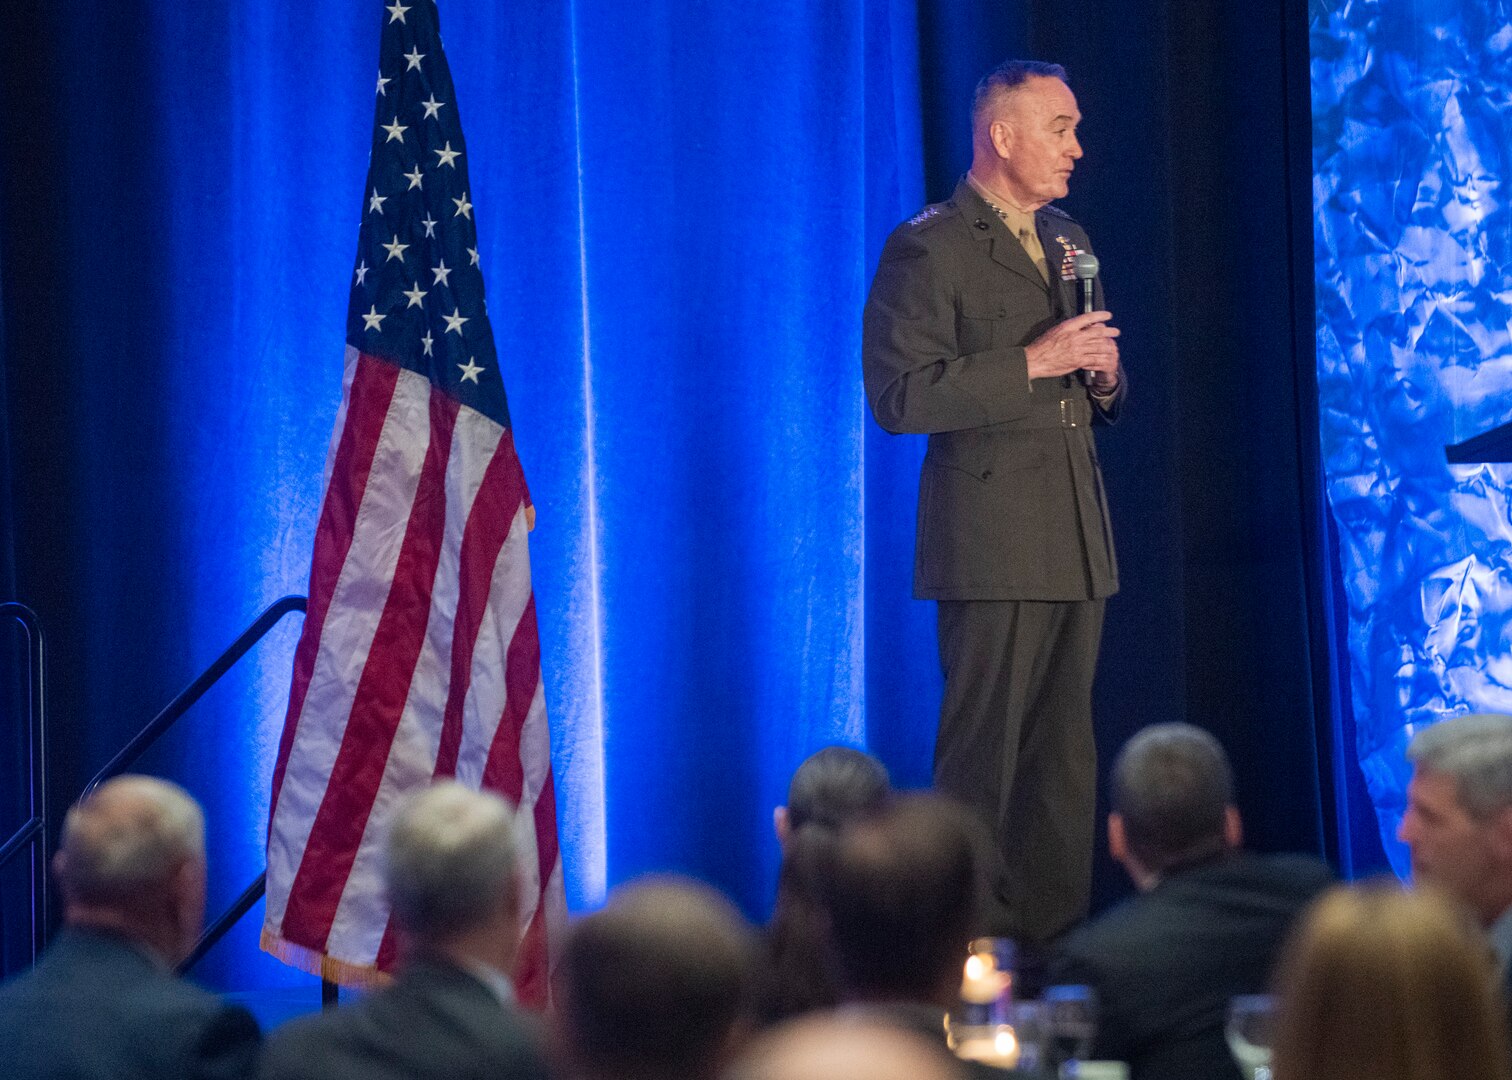 Marine Corps Gen. Joe Dunford, chairman of the Joint Chiefs of Staff, addresses the crowd after receiving the 2019 Dwight D. Eisenhower award at the National Defense Industrial Association dinner in Arlington, Virginia, May 10, 2019.